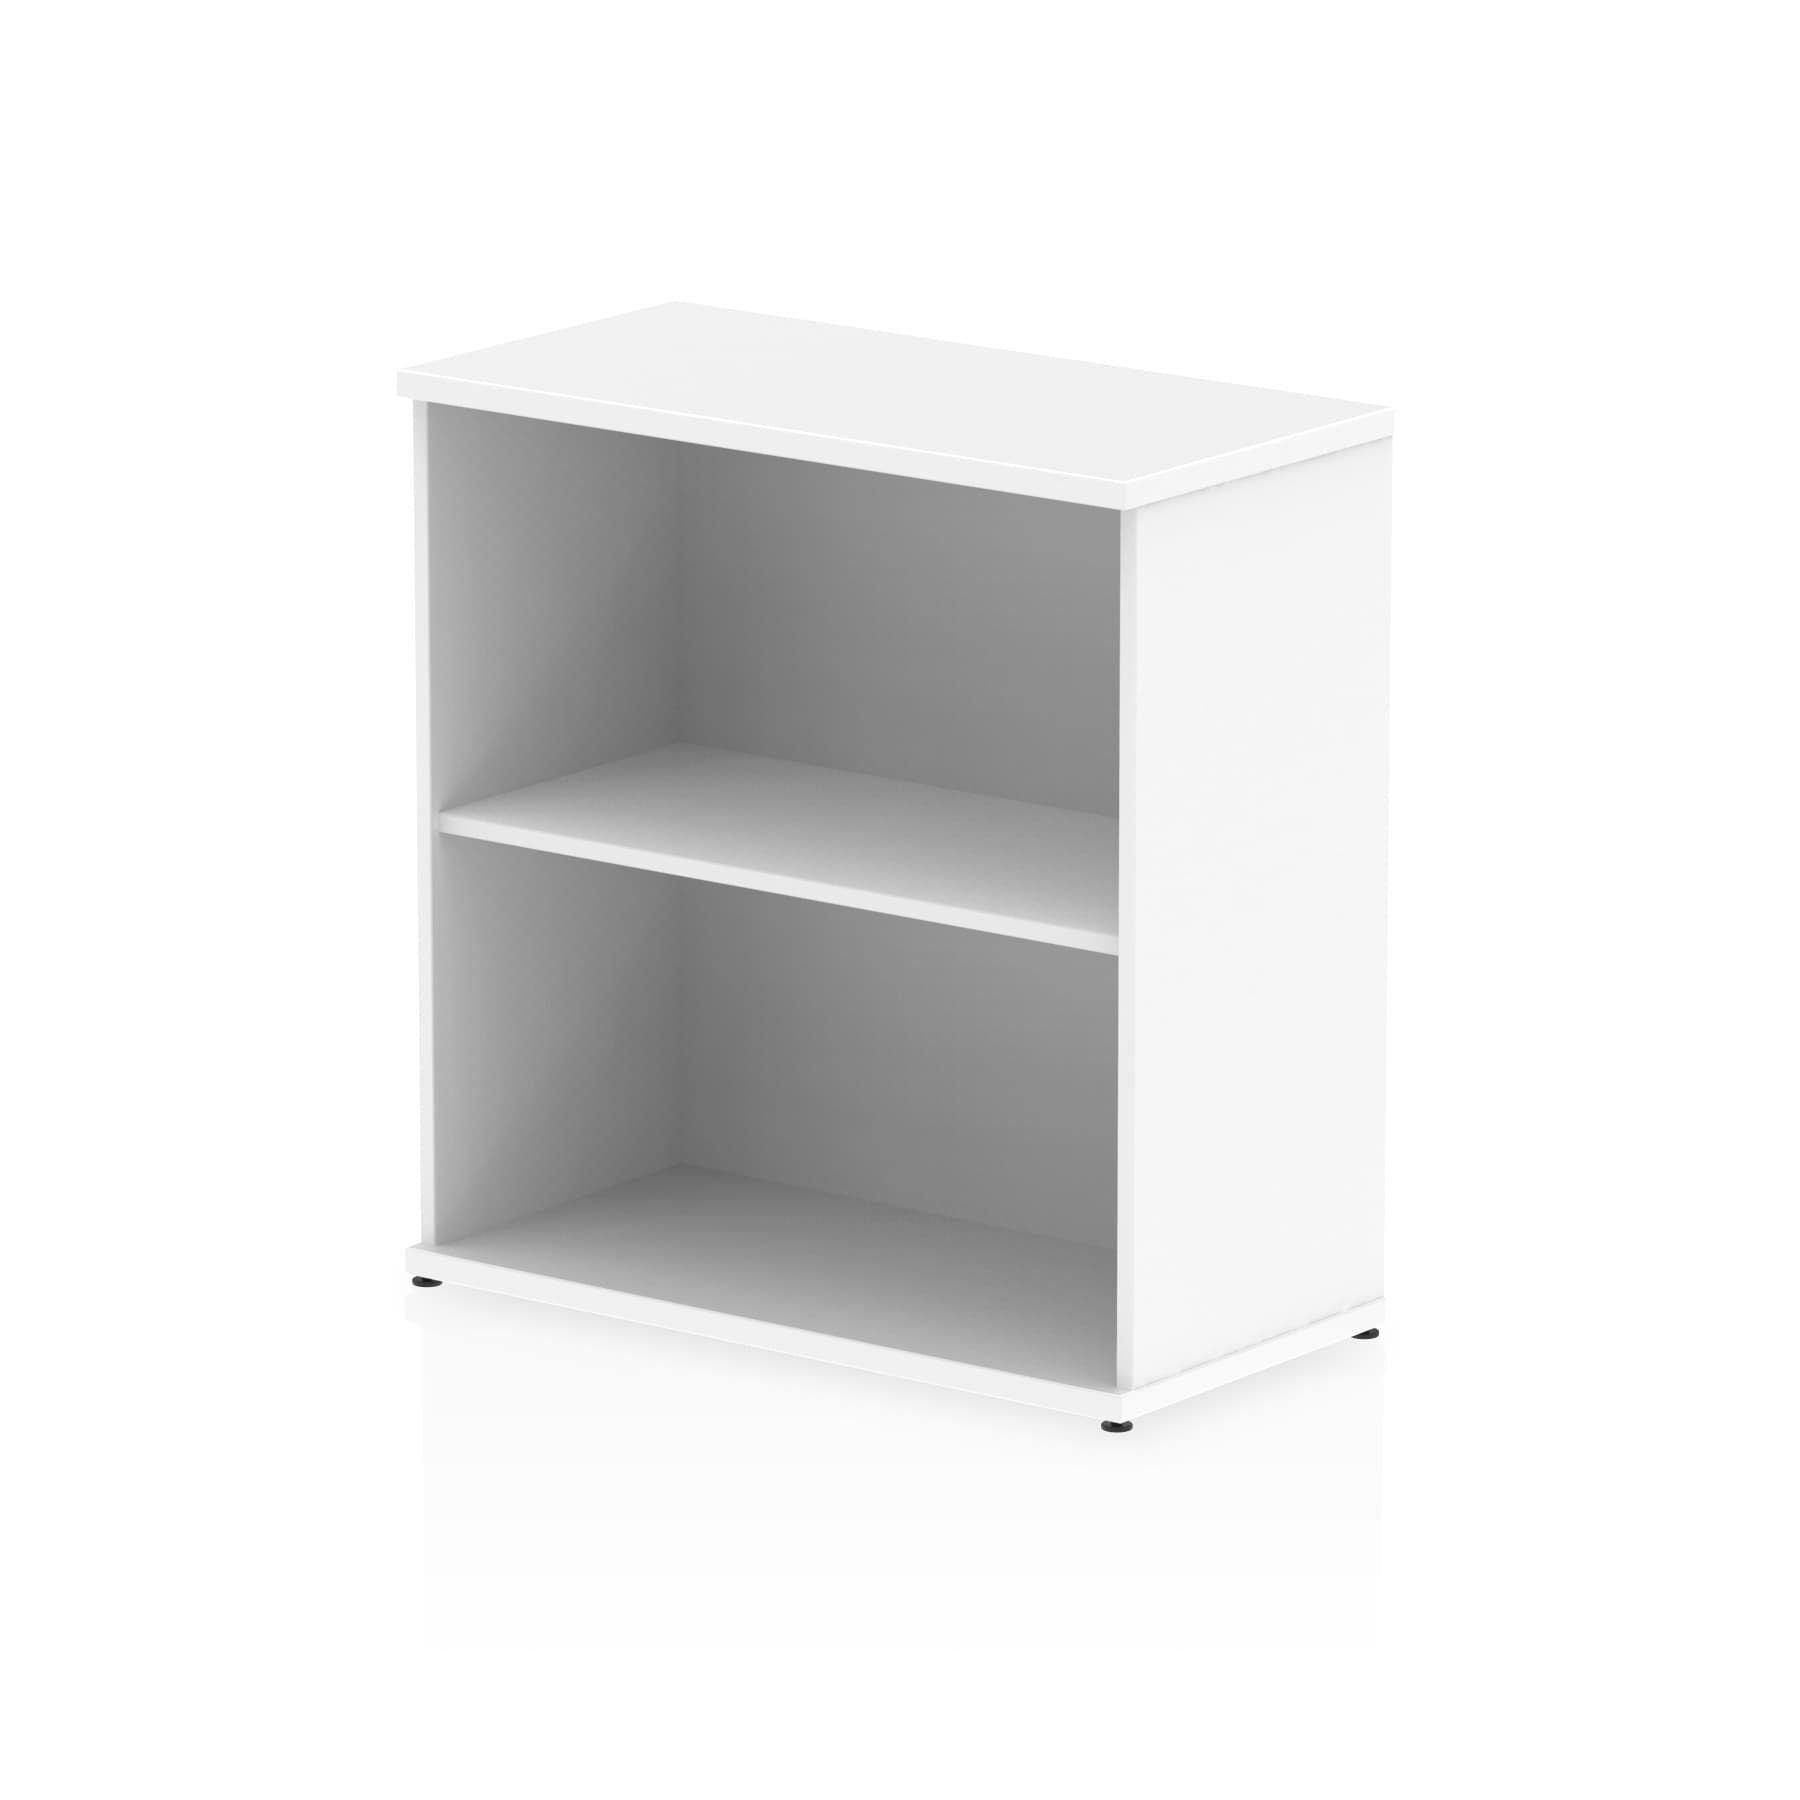 Impulse Bookcase (Available in 4 Sizes)